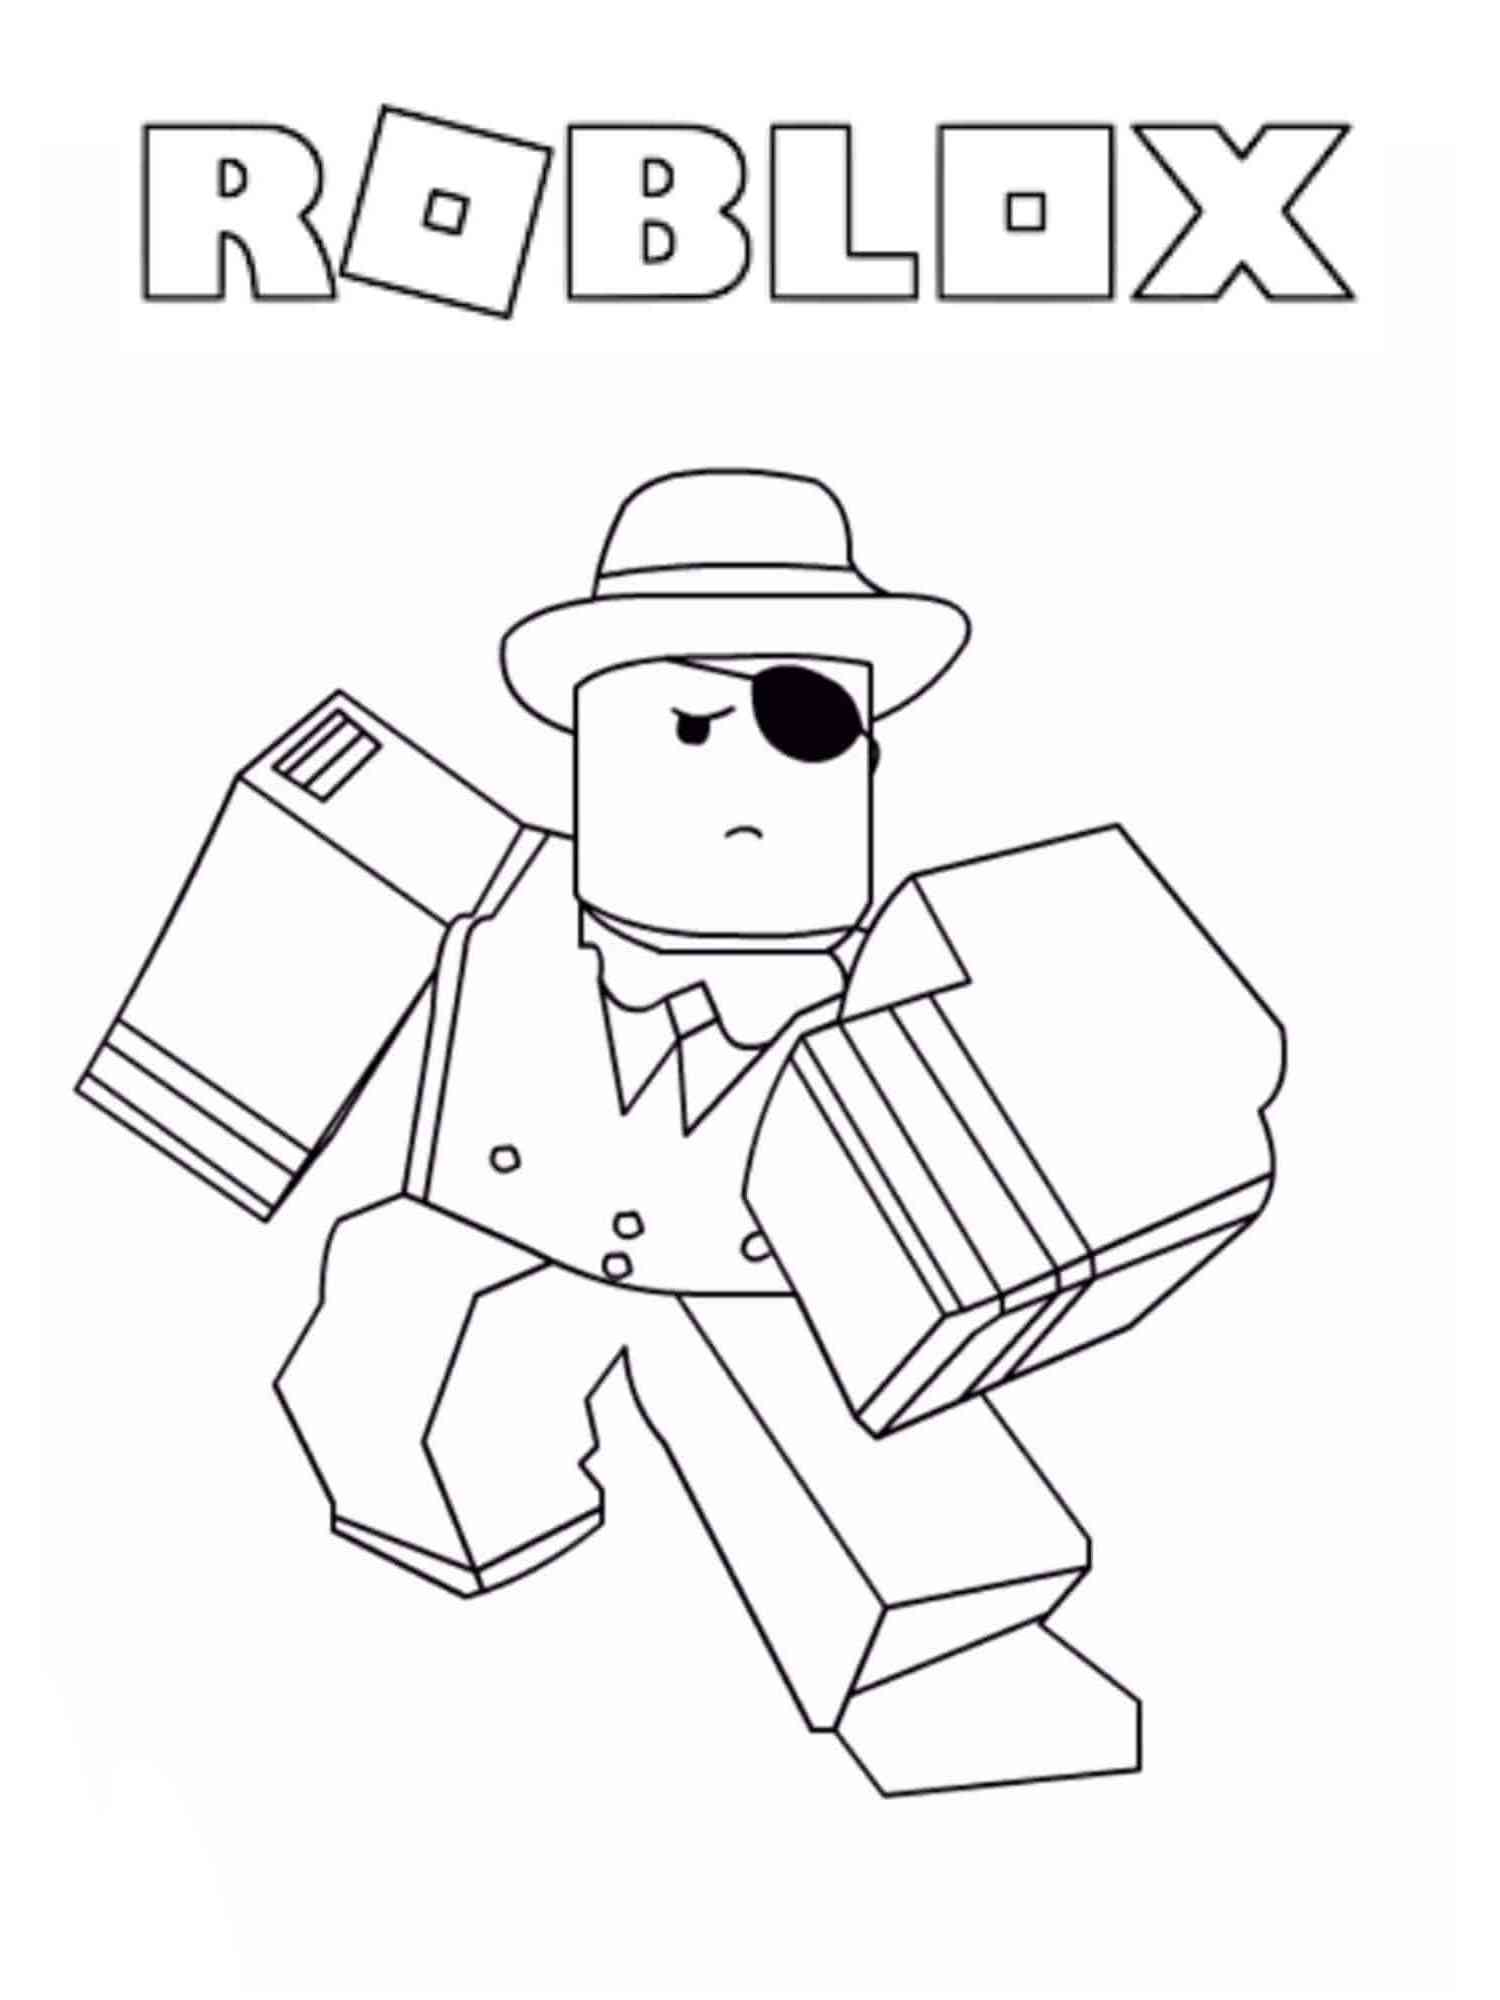 Roblox Skin coloring page